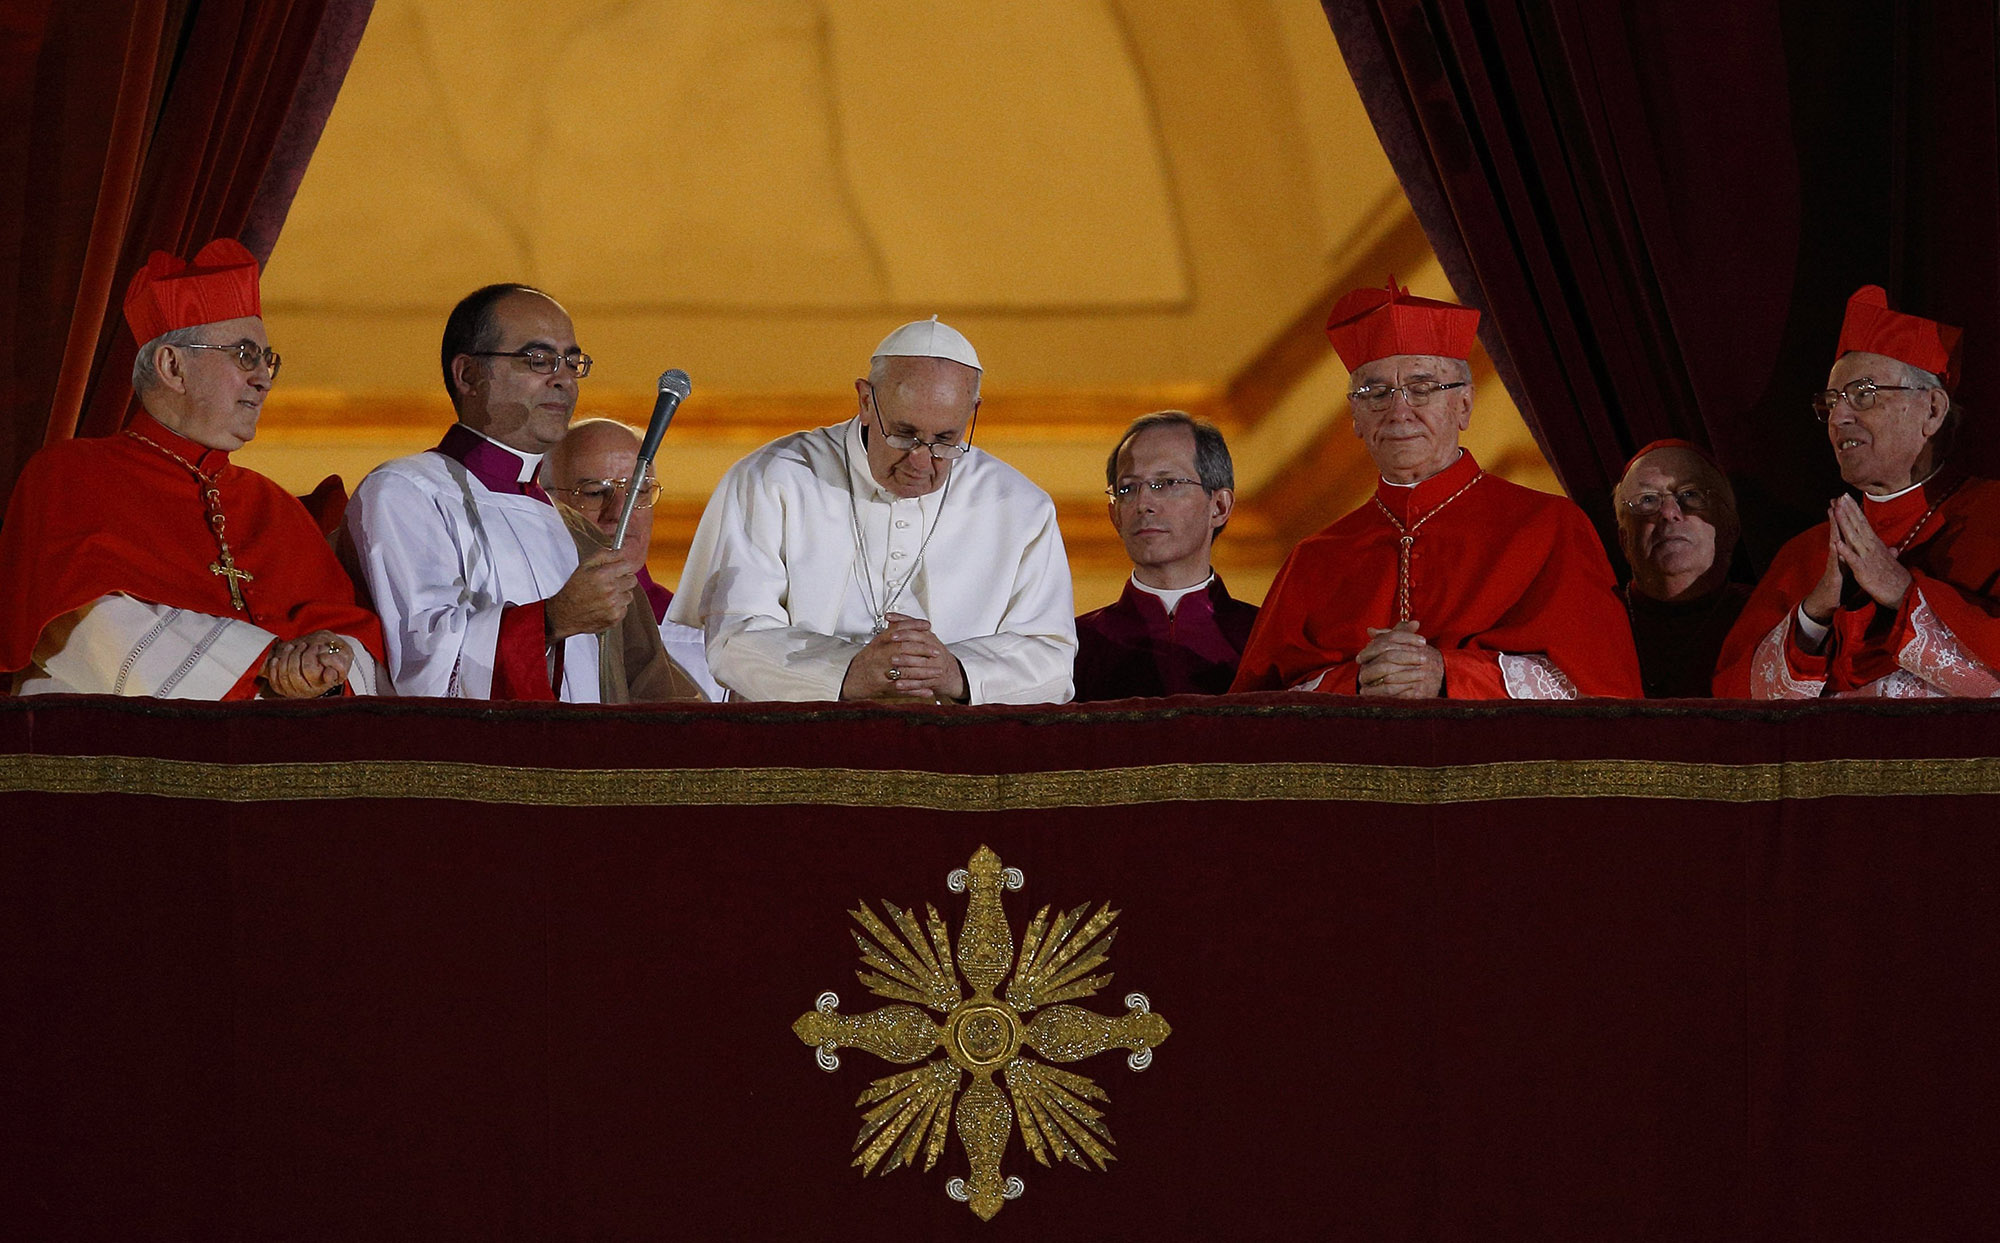 Pope Francis bowed his head in prayer during his election night appearance on the central balcony of St. Peter’s Basilica at the Vatican March 13, 2013. The crowd joined the pope in silent prayer after he asked them to pray that God would bless him.